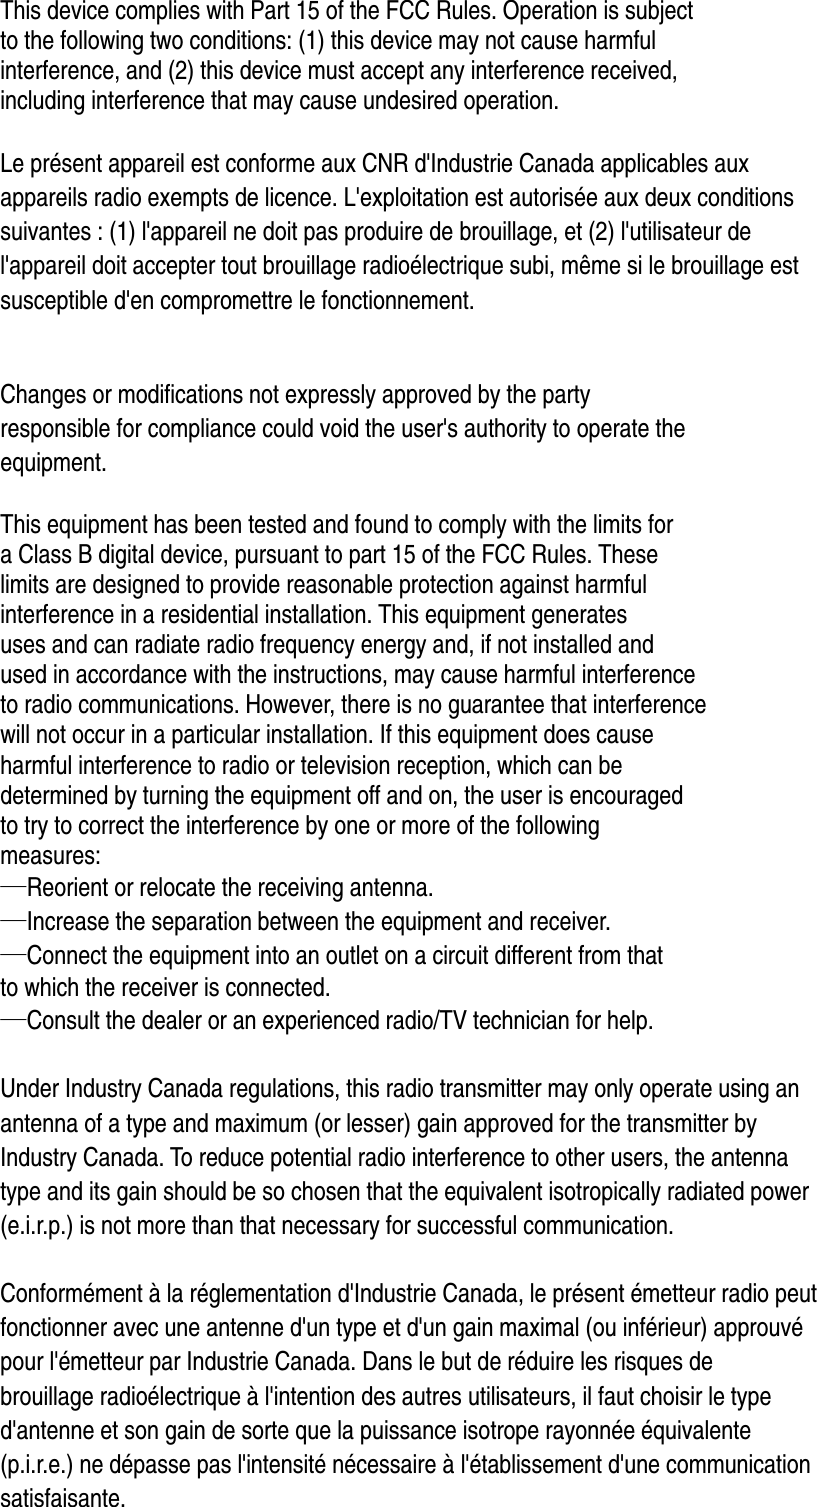  This device complies with Part 15 of the FCC Rules. Operation is subject   to the following two conditions: (1) this device may not cause harmful   interference, and (2) this device must accept any interference received,   including interference that may cause undesired operation.  Le présent appareil est conforme aux CNR d&apos;Industrie Canada applicables aux   appareils radio exempts de licence. L&apos;exploitation est autorisée aux deux conditions   suivantes : (1) l&apos;appareil ne doit pas produire de brouillage, et (2) l&apos;utilisateur de   l&apos;appareil doit accepter tout brouillage radioélectrique subi, même si le brouillage est   susceptible d&apos;en compromettre le fonctionnement.   Changes or modifications not expressly approved by the party   responsible for compliance could void the user&apos;s authority to operate the   equipment.  This equipment has been tested and found to comply with the limits for   a Class B digital device, pursuant to part 15 of the FCC Rules. These   limits are designed to provide reasonable protection against harmful   interference in a residential installation. This equipment generates   uses and can radiate radio frequency energy and, if not installed and   used in accordance with the instructions, may cause harmful interference   to radio communications. However, there is no guarantee that interference   will not occur in a particular installation. If this equipment does cause   harmful interference to radio or television reception, which can be   determined by turning the equipment off and on, the user is encouraged   to try to correct the interference by one or more of the following   measures: —Reorient or relocate the receiving antenna. —Increase the separation between the equipment and receiver. —Connect the equipment into an outlet on a circuit different from that   to which the receiver is connected. —Consult the dealer or an experienced radio/TV technician for help.  Under Industry Canada regulations, this radio transmitter may only operate using an   antenna of a type and maximum (or lesser) gain approved for the transmitter by   Industry Canada. To reduce potential radio interference to other users, the antenna   type and its gain should be so chosen that the equivalent isotropically radiated power   (e.i.r.p.) is not more than that necessary for successful communication.    Conformément à la réglementation d&apos;Industrie Canada, le présent émetteur radio peut fonctionner avec une antenne d&apos;un type et d&apos;un gain maximal (ou inférieur) approuvé   pour l&apos;émetteur par Industrie Canada. Dans le but de réduire les risques de   brouillage radioélectrique à l&apos;intention des autres utilisateurs, il faut choisir le type   d&apos;antenne et son gain de sorte que la puissance isotrope rayonnée équivalente   (p.i.r.e.) ne dépasse pas l&apos;intensité nécessaire à l&apos;établissement d&apos;une communication   satisfaisante.  